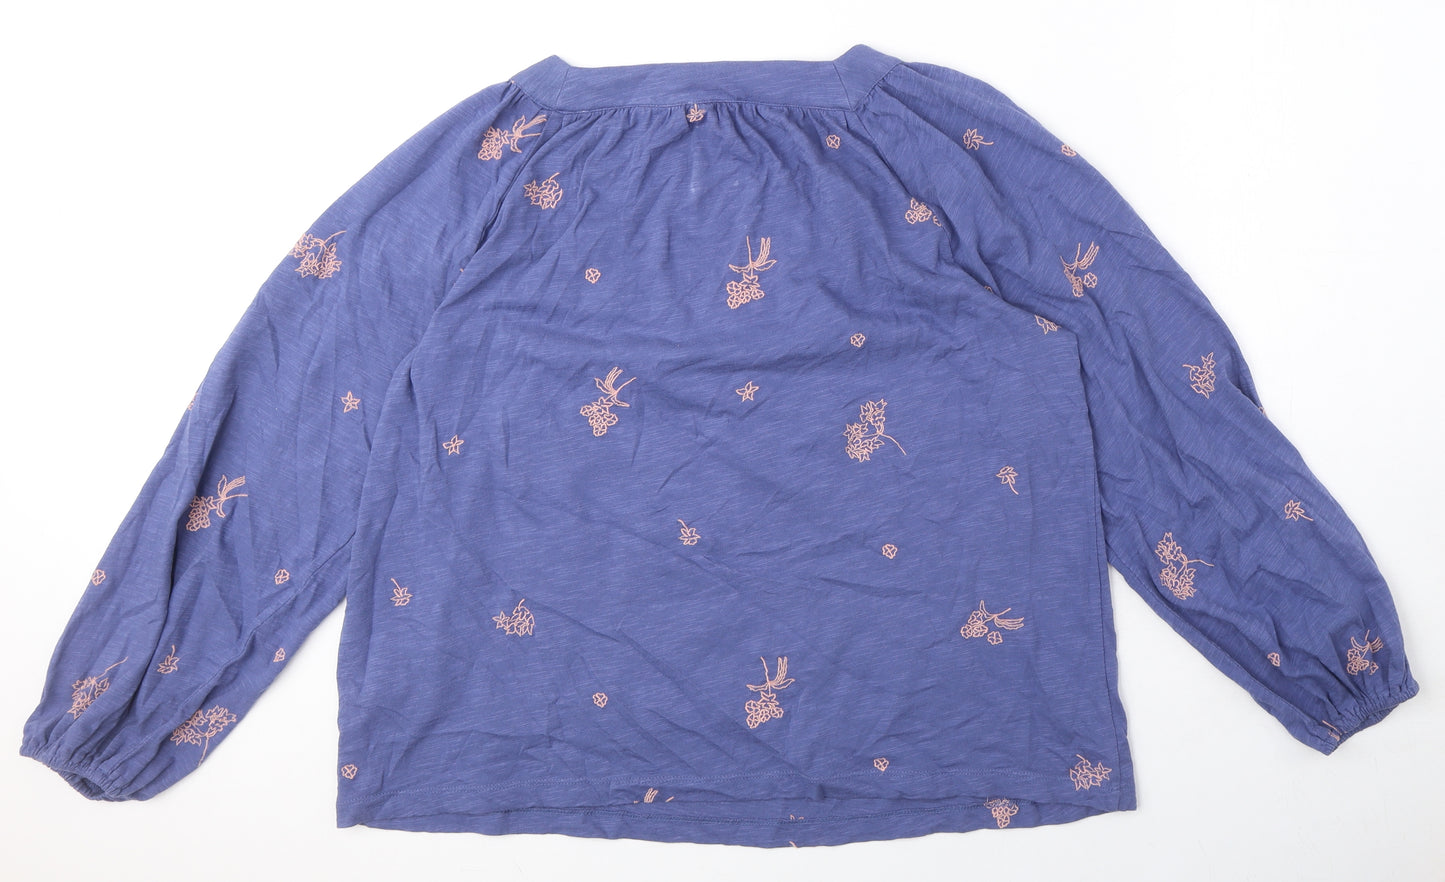 White Stuff Womens Blue Floral 100% Cotton Basic Blouse Size 12 Square Neck - Embroidered flowers